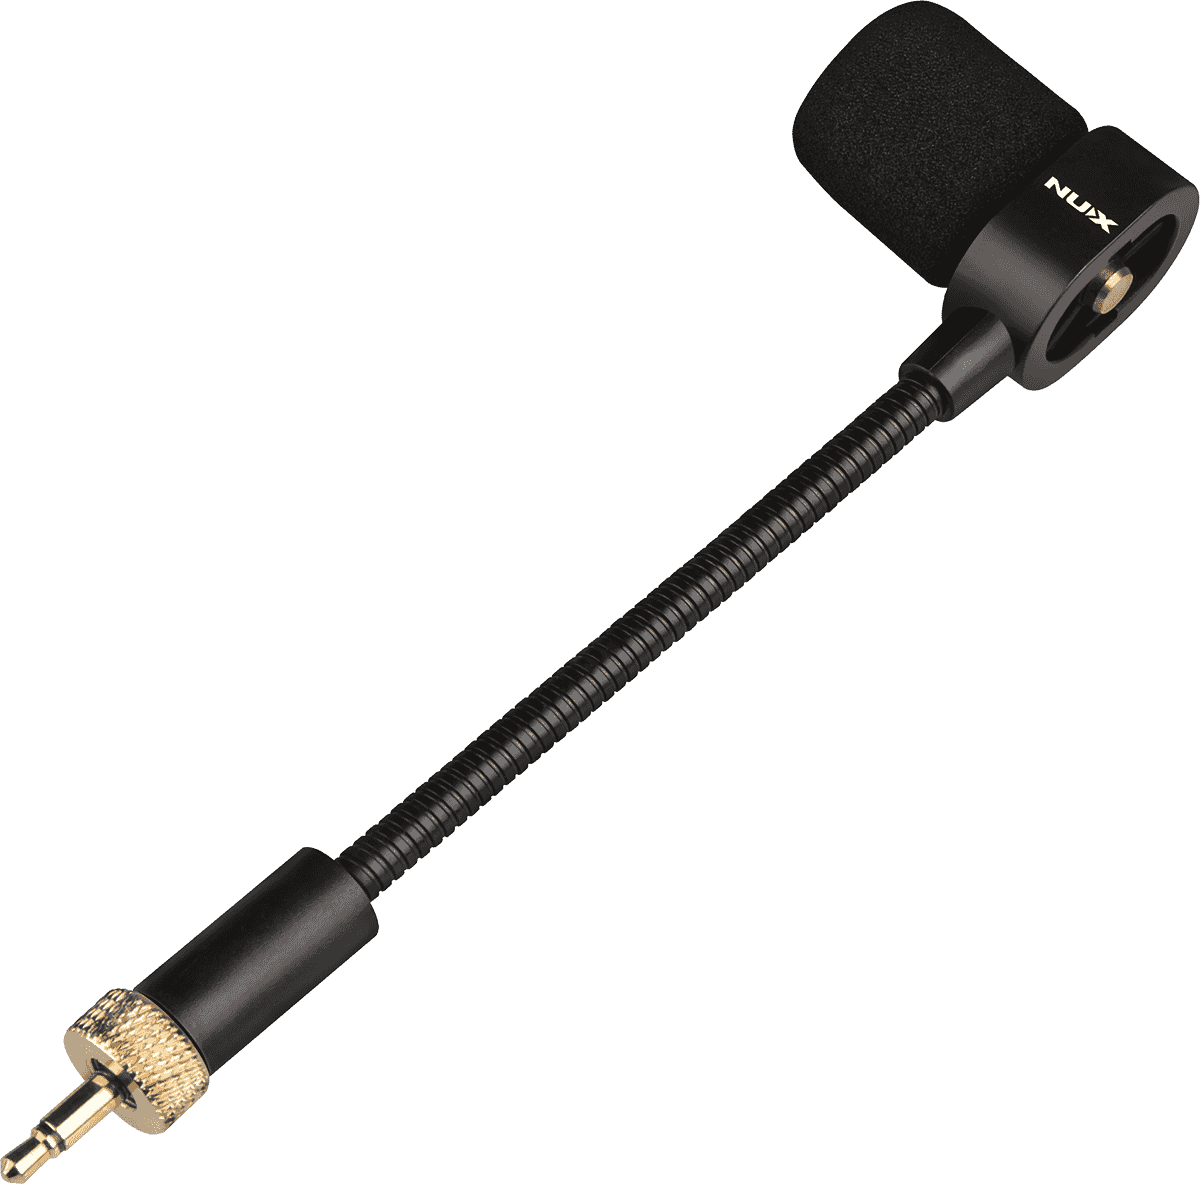 B6 - Wireless system for saxophone